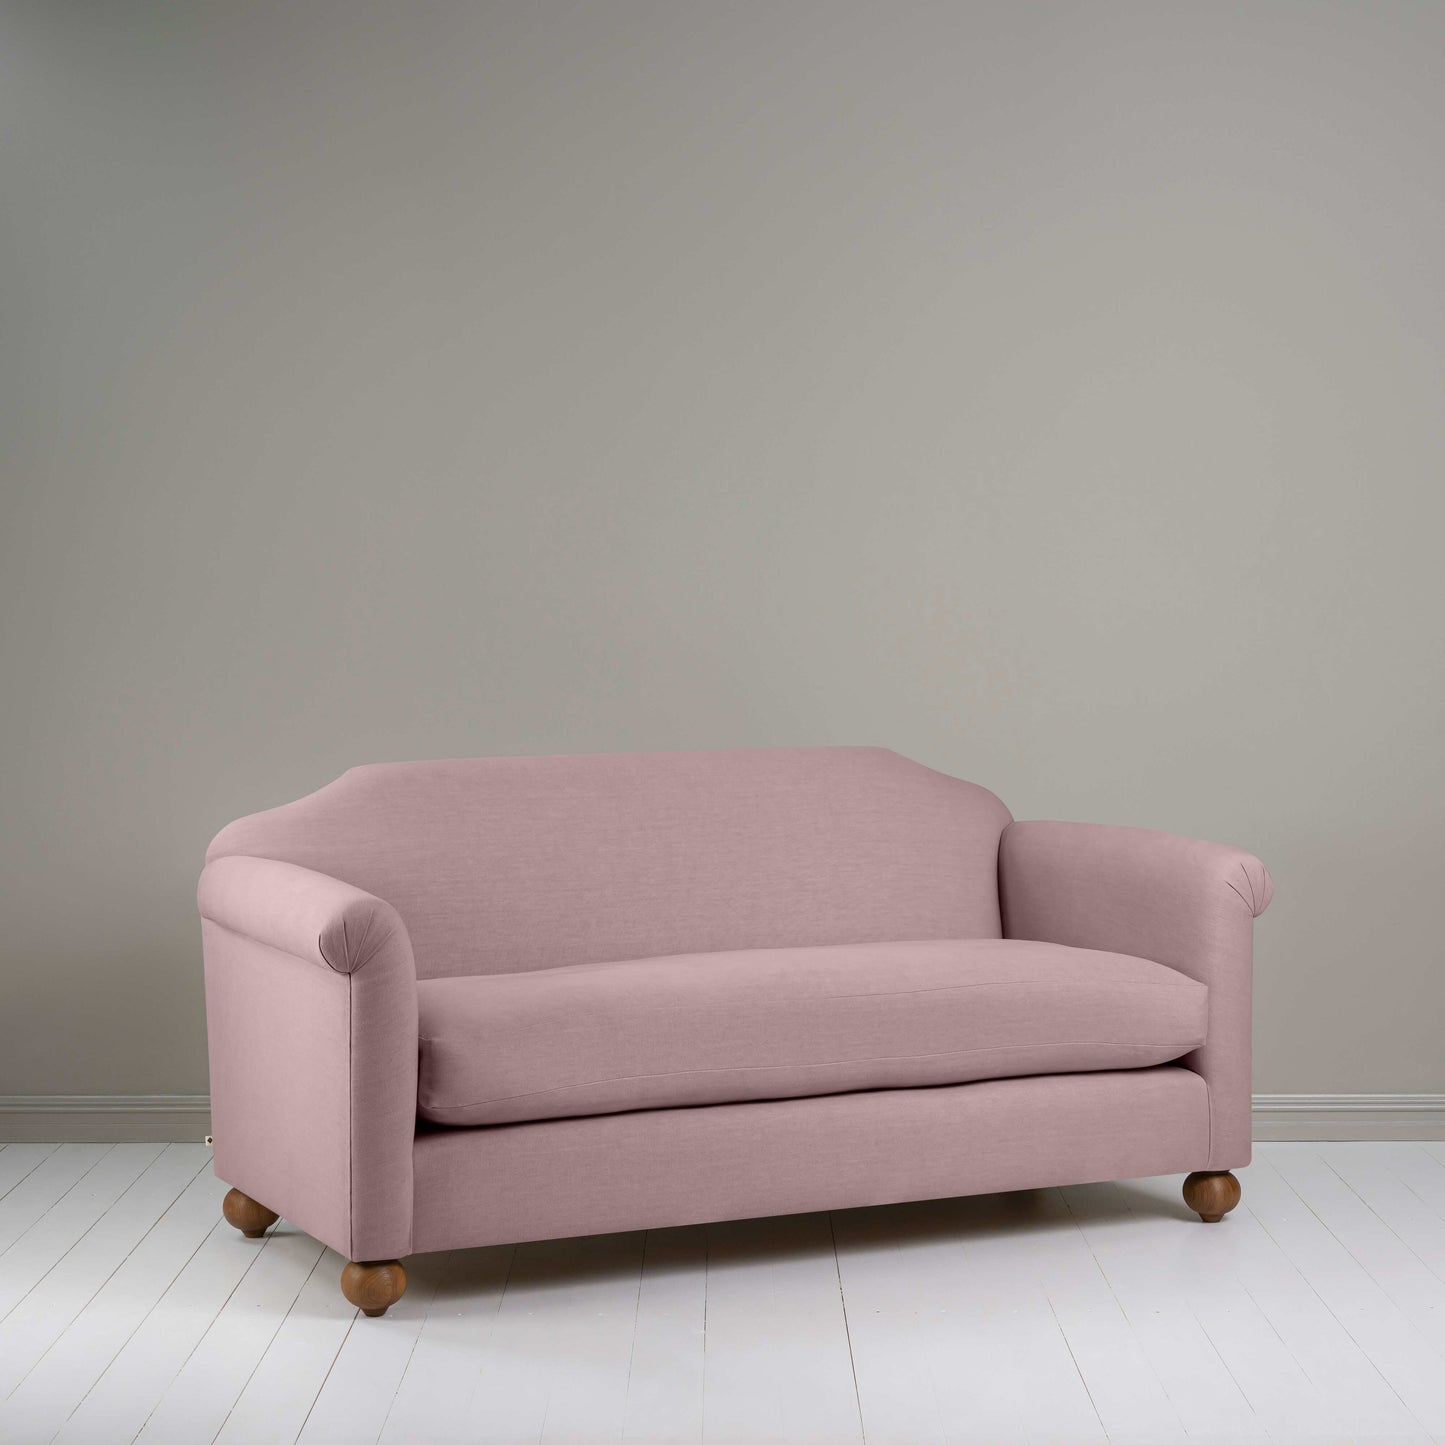 Dolittle 3 Seater Sofa in Laidback Linen Heather